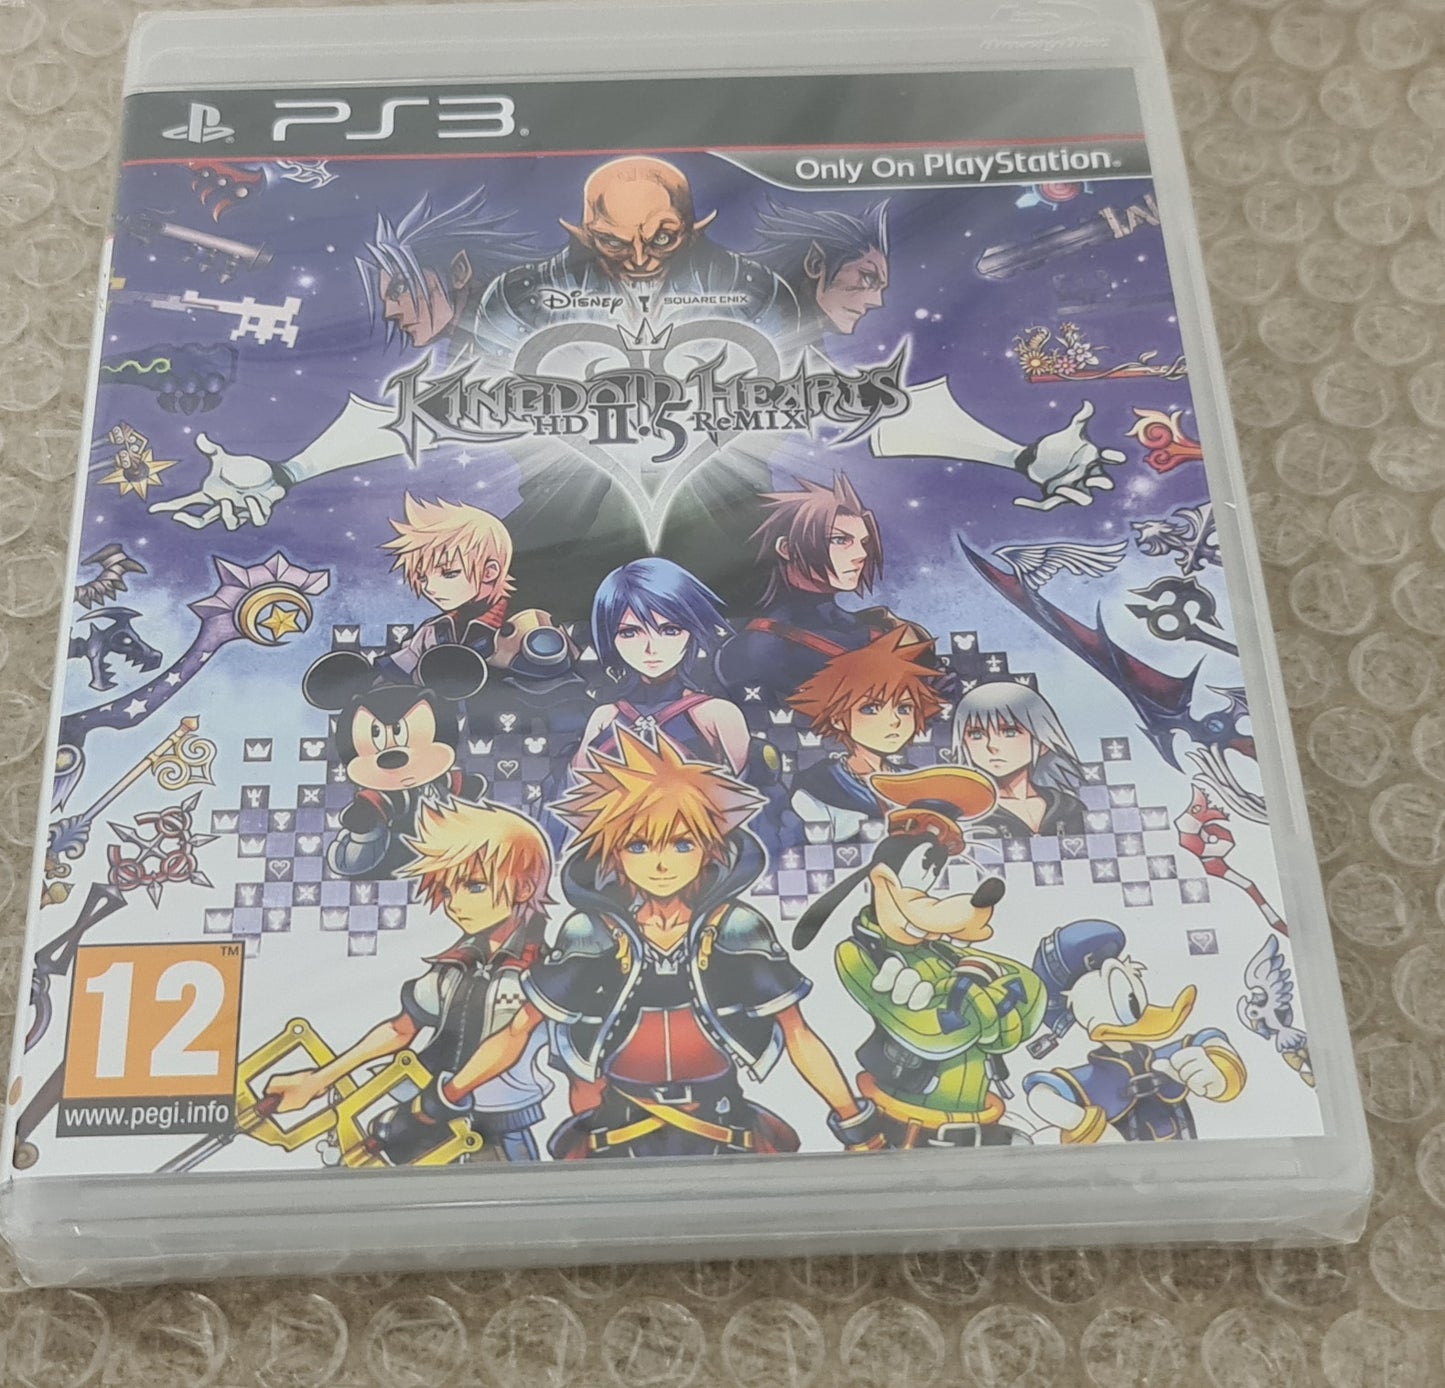 Brand New and Sealed Kingdom Hearts 2.5 HD Remix Sony Playstation 3 (PS3) Game